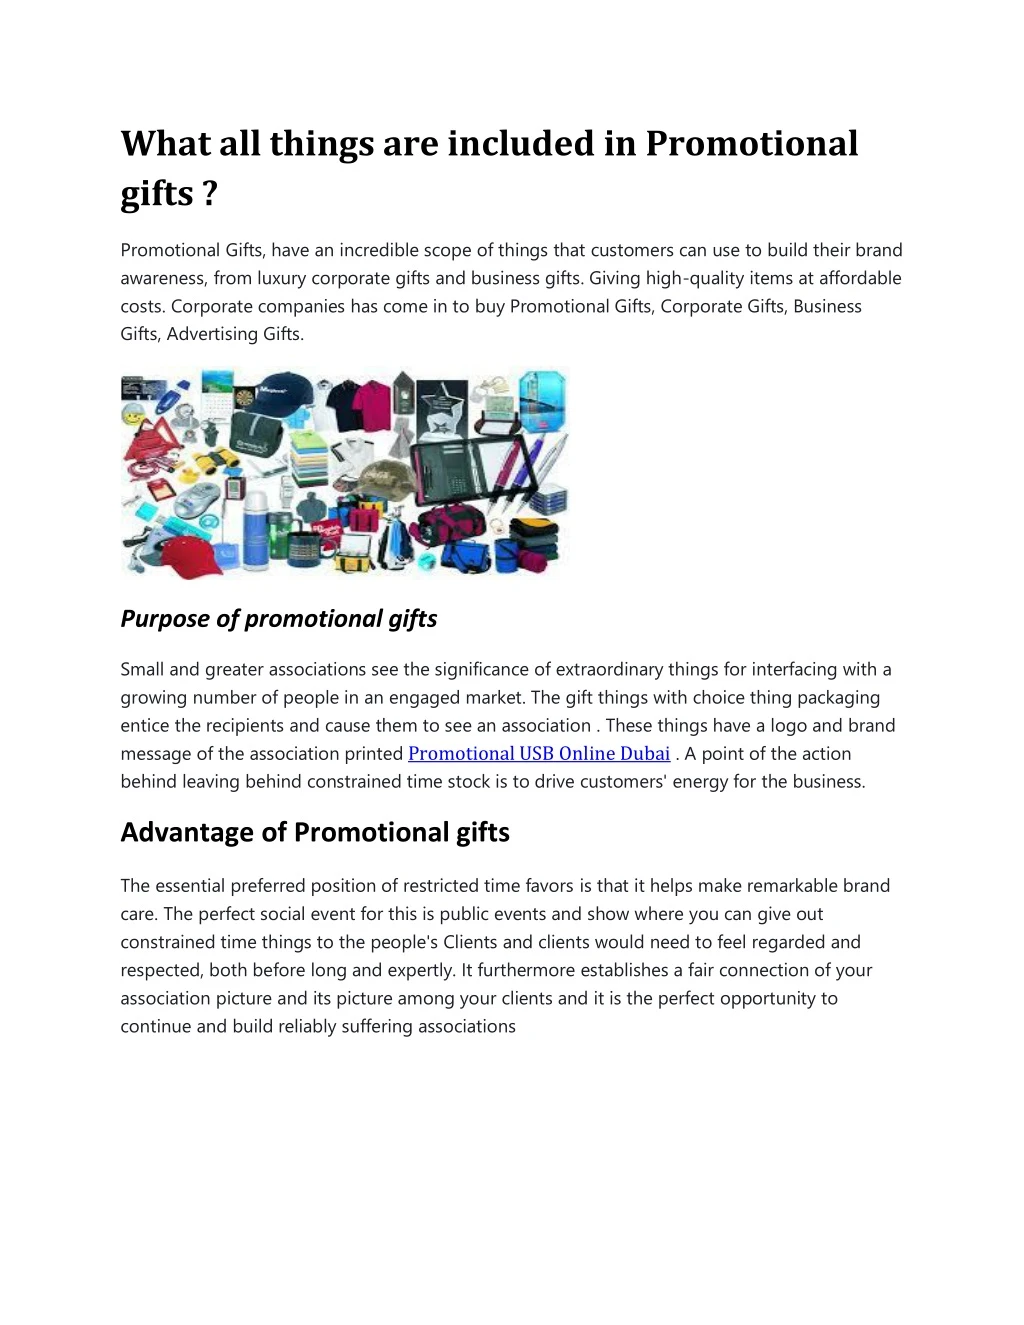 what all things are included in promotional gifts